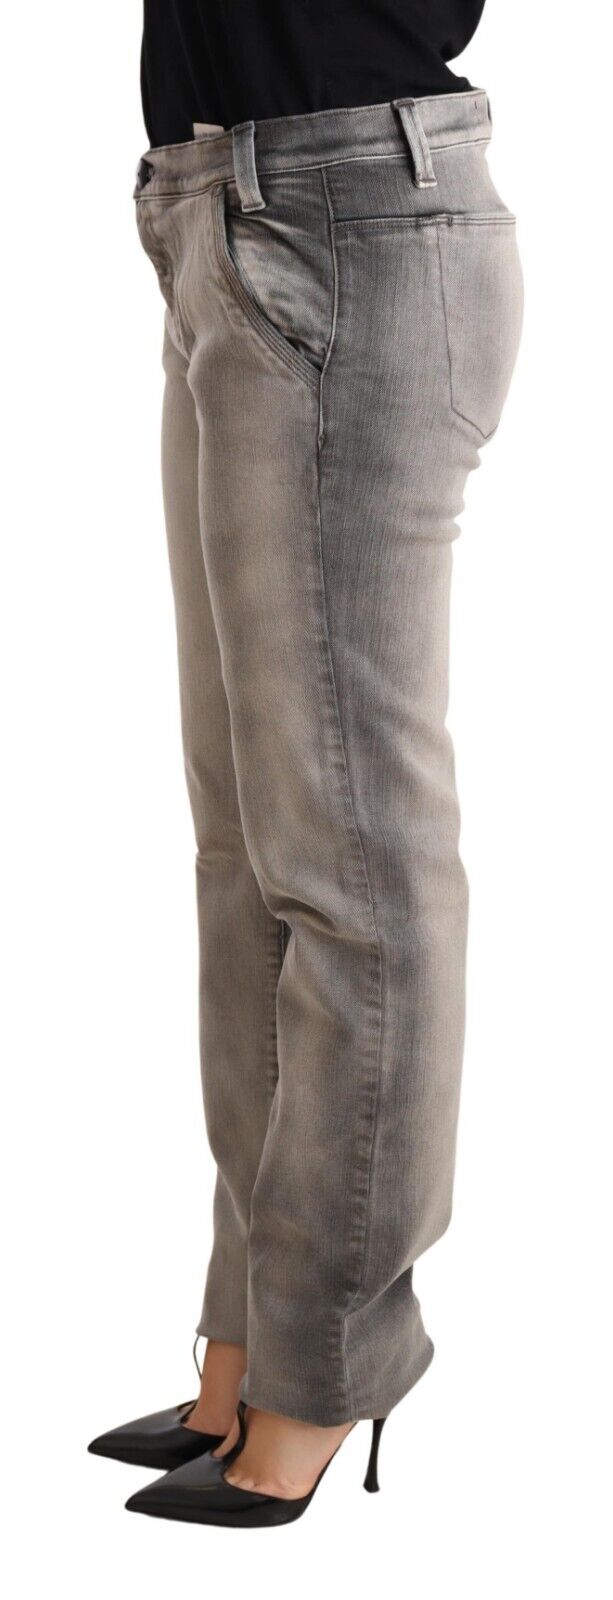 Gray Washed Low Waist Skinny Trouser Cotton Jeans - Avaz Shop